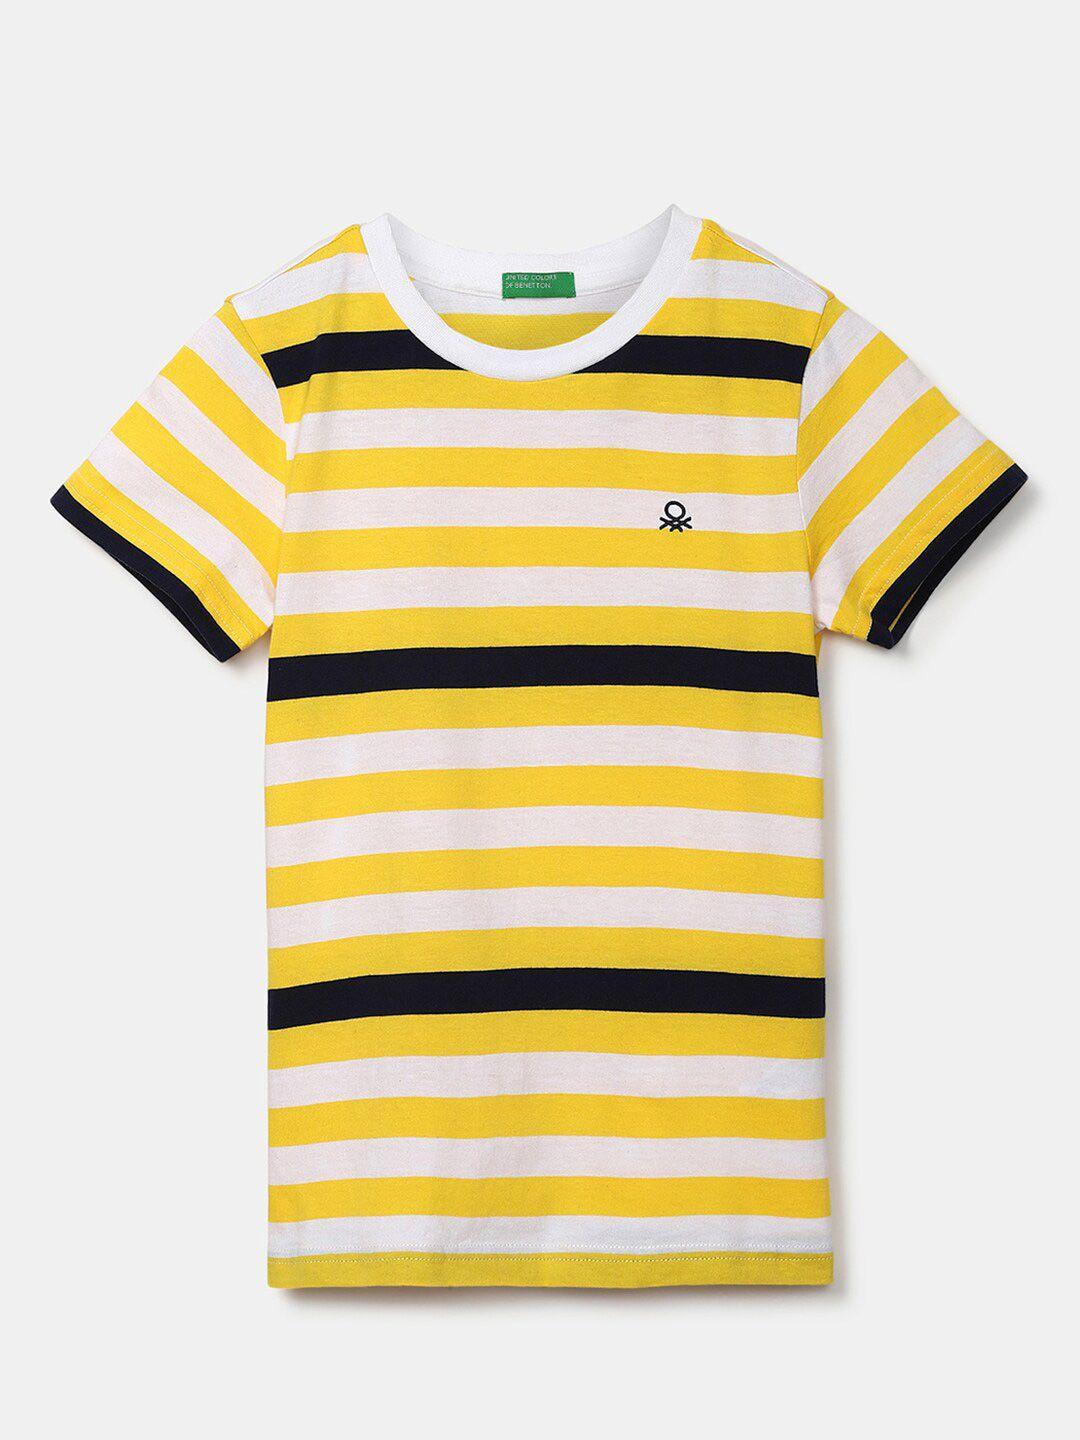 united colors of benetton boys yellow striped t-shirt